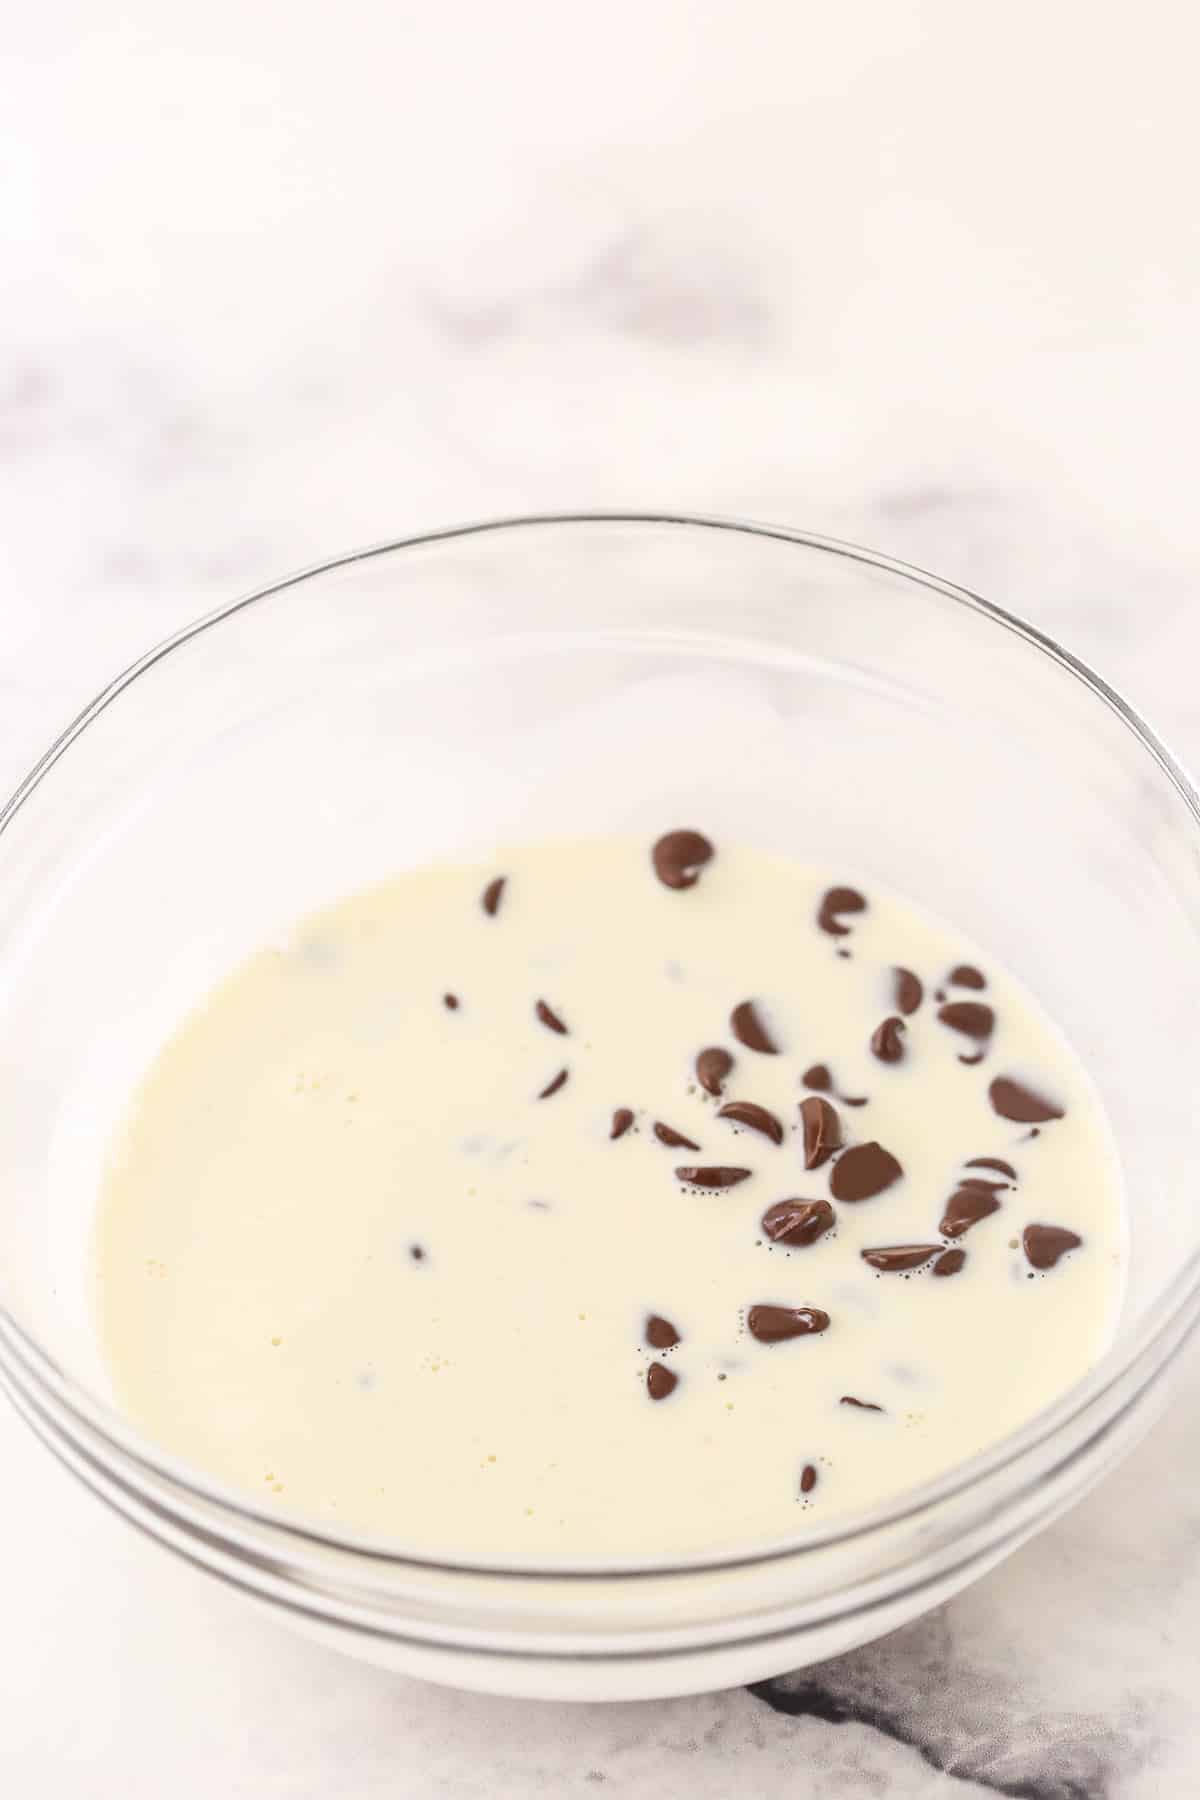 Heavy cream and chocolate chips in a glass bowl